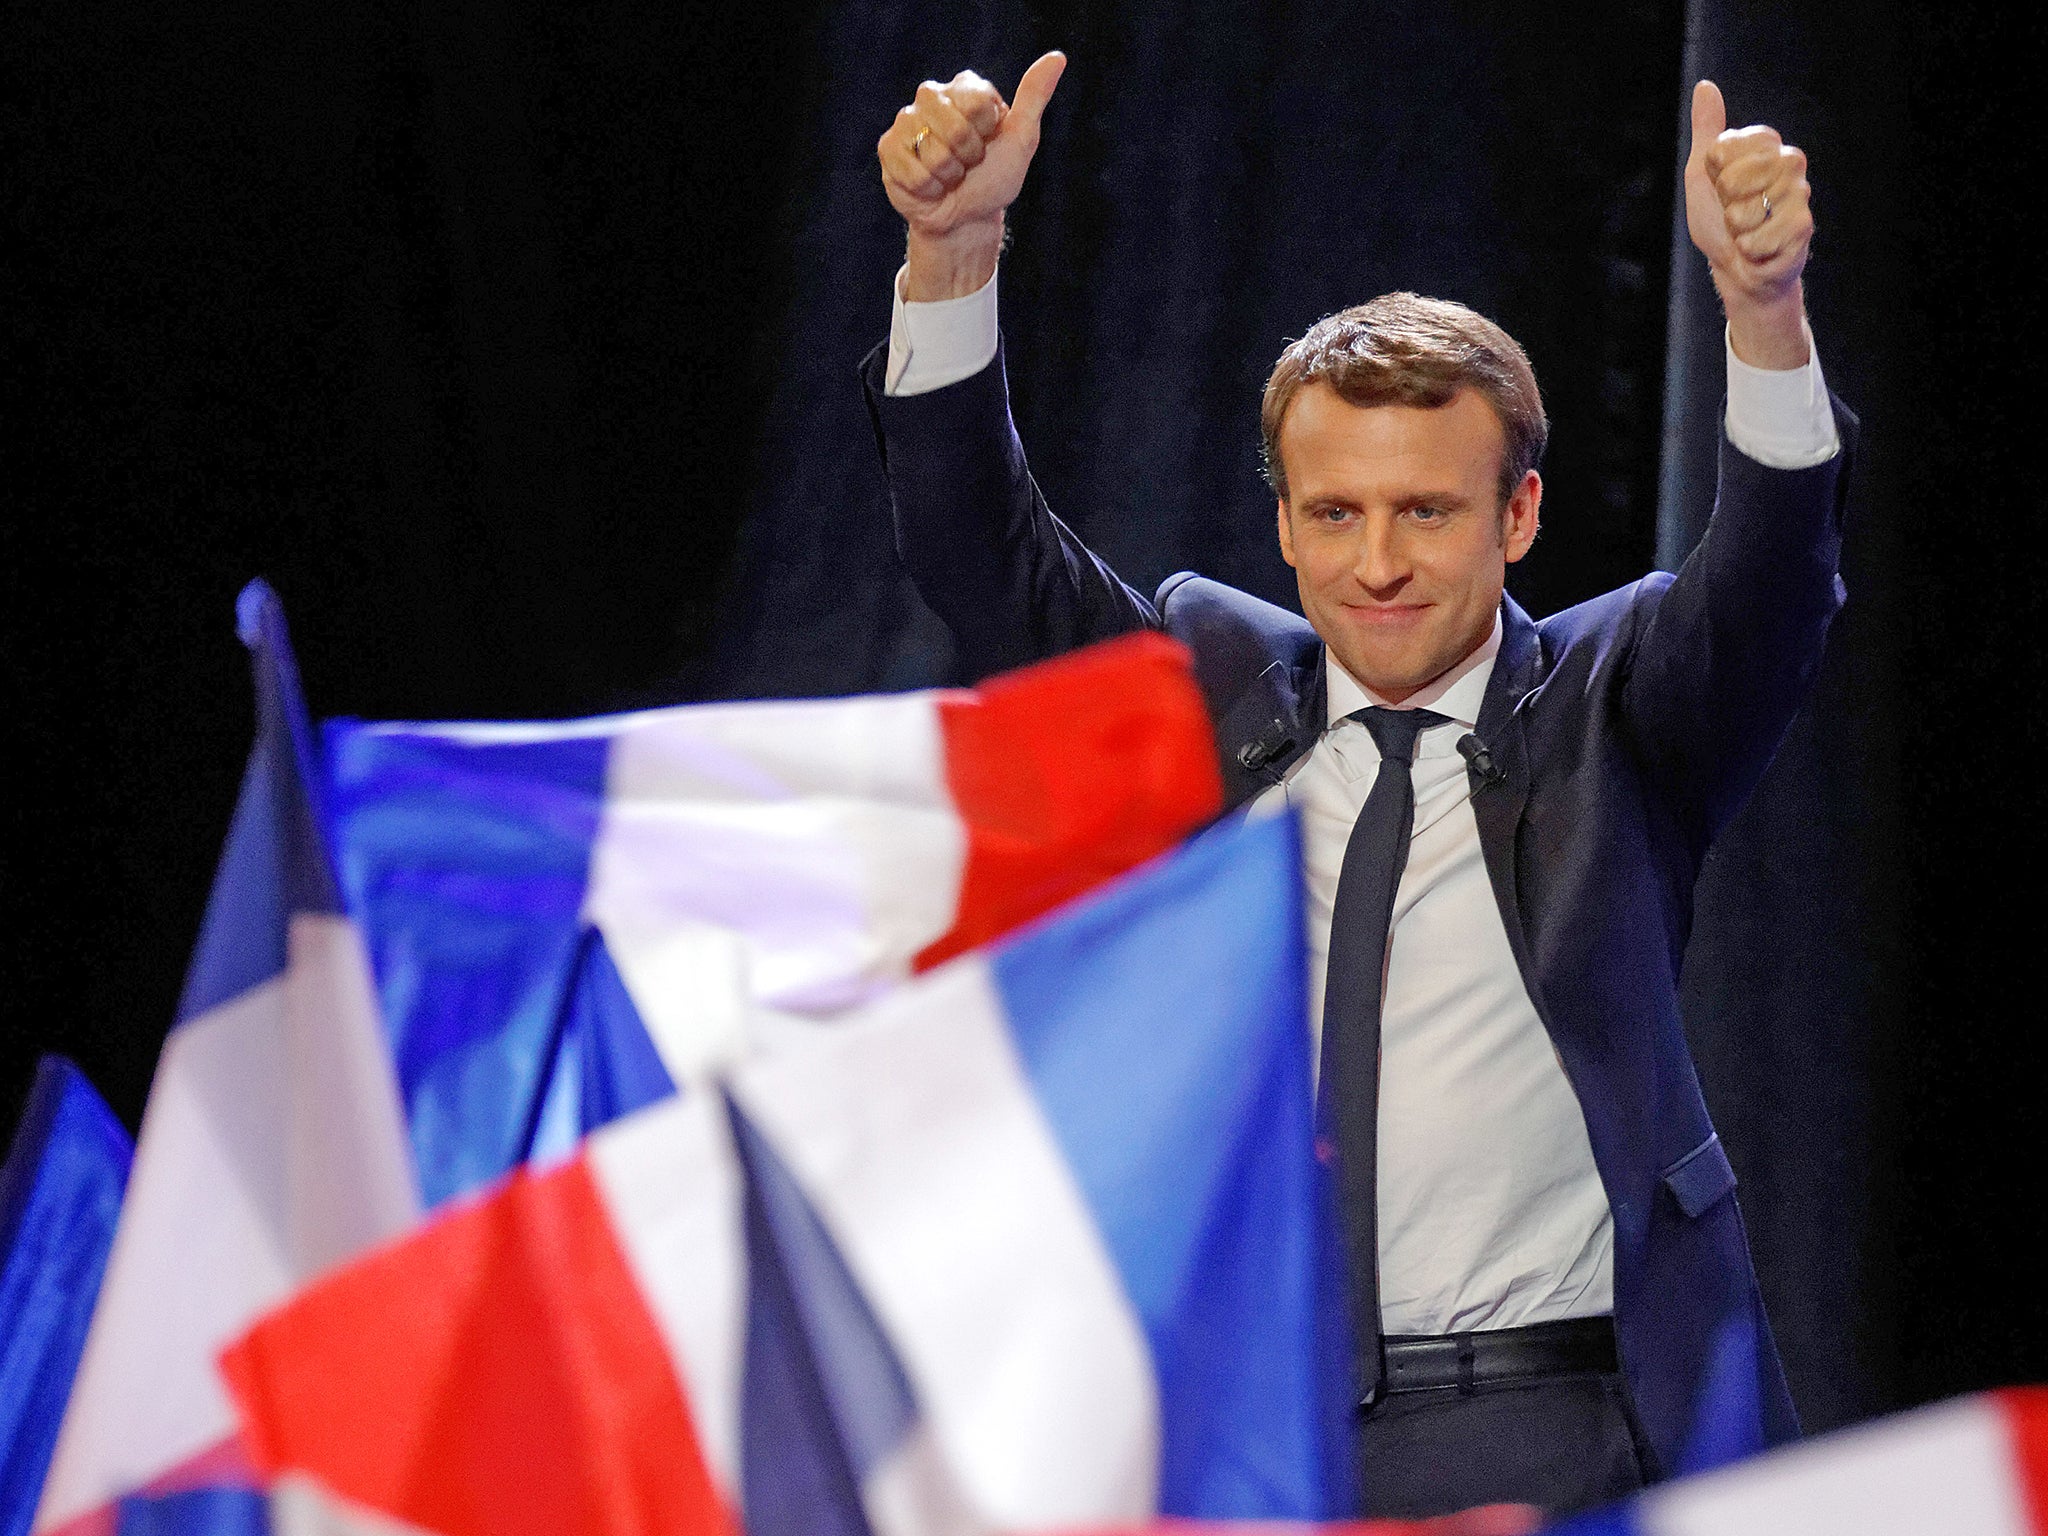 Emmanuel Macron is head to head against Marine Le Pen for the French presidency